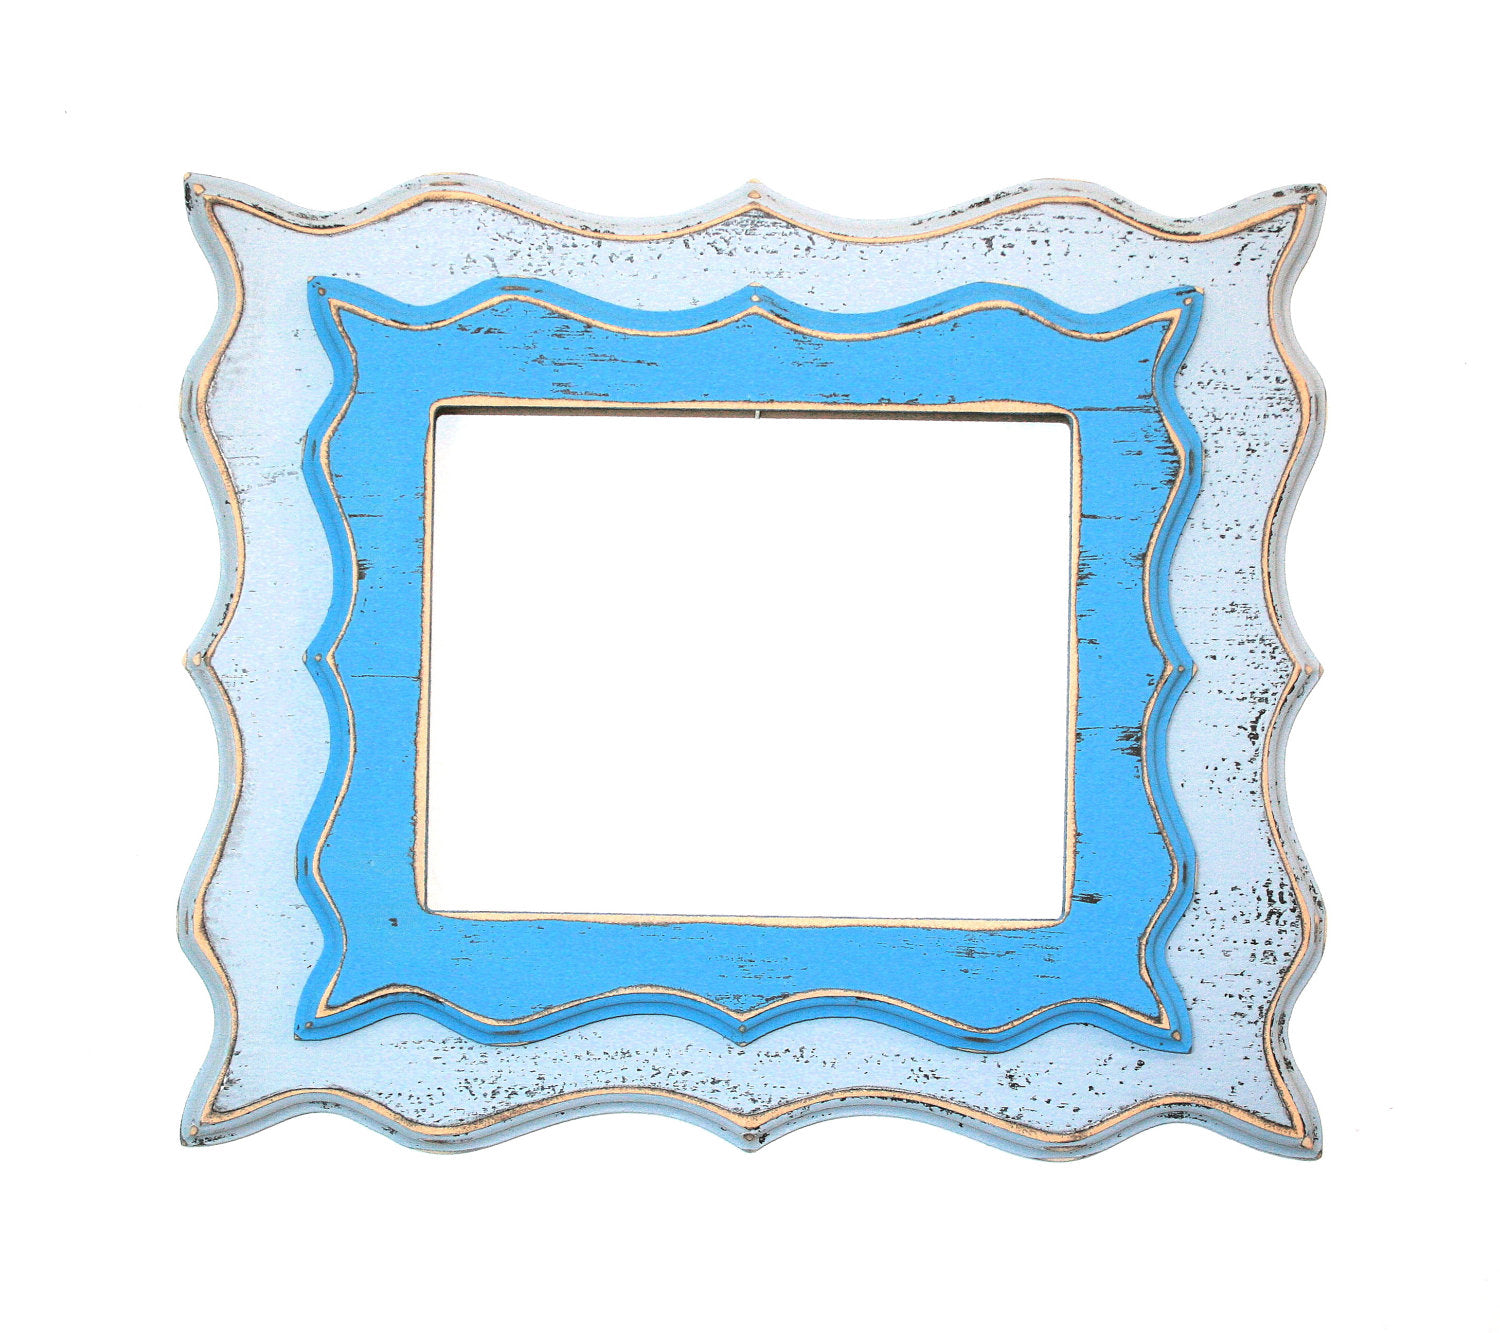 Shabby picture frame 10x10, 11x14 or 12x12 